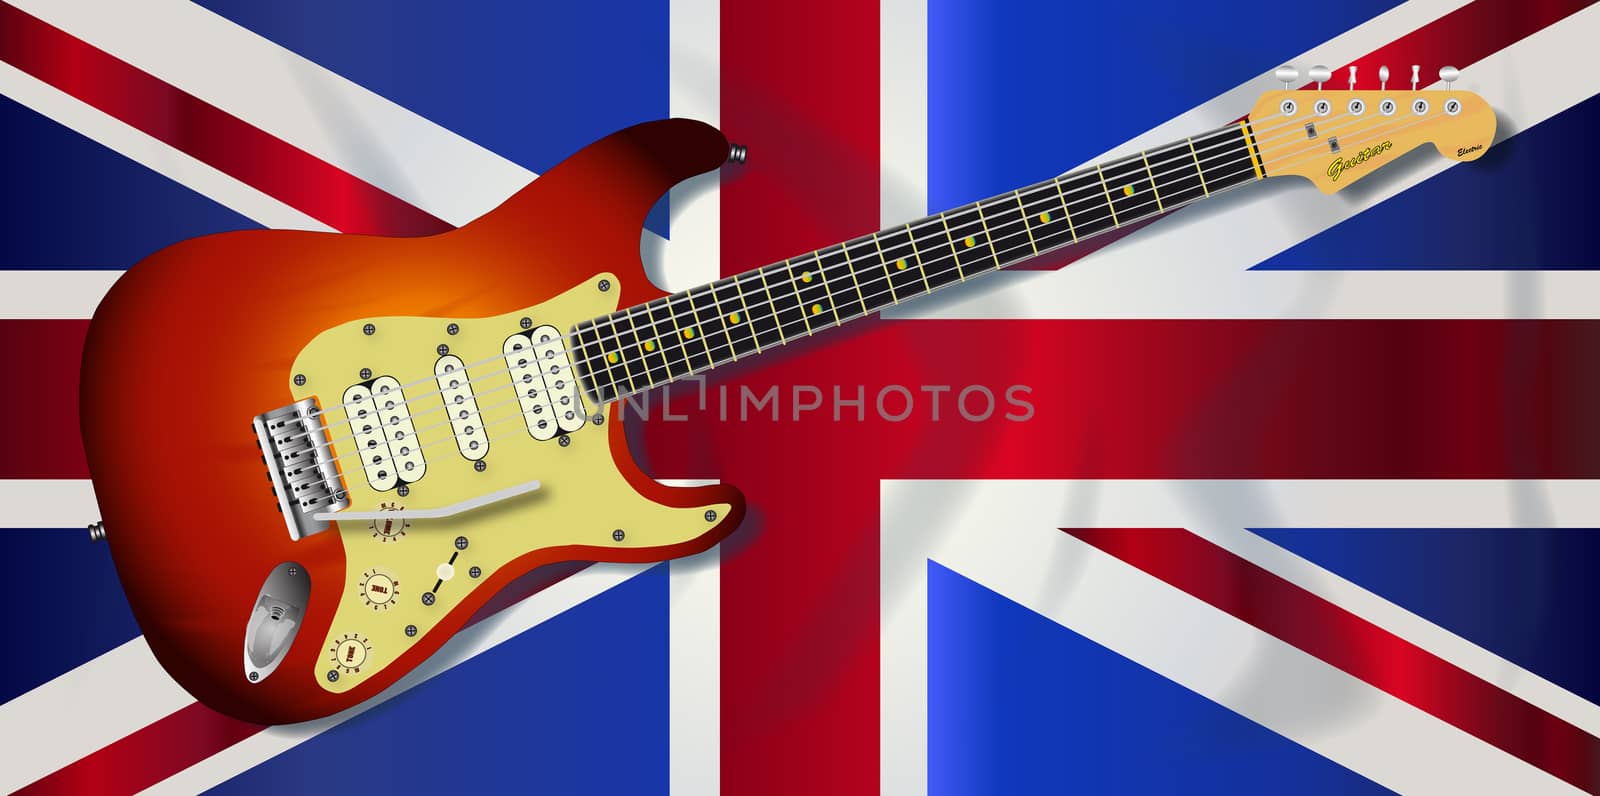 Typical Union Jack flag of the United Kingdom with a typical electric guitar over